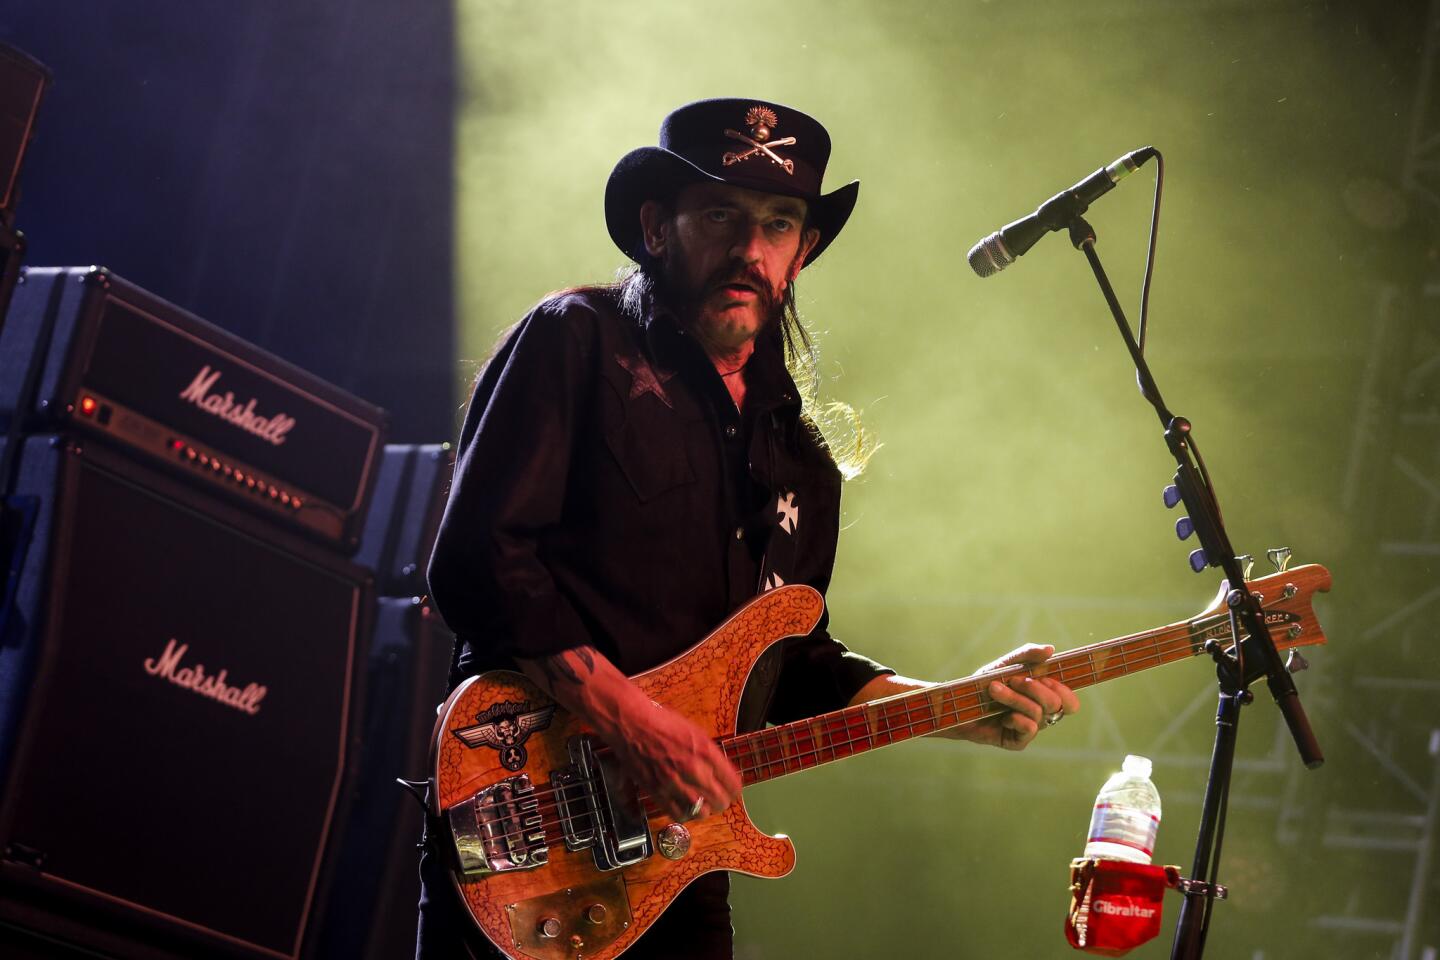 Lemmy Kilmister performs at the Coachella Valley Music and Arts Festival in 2014.